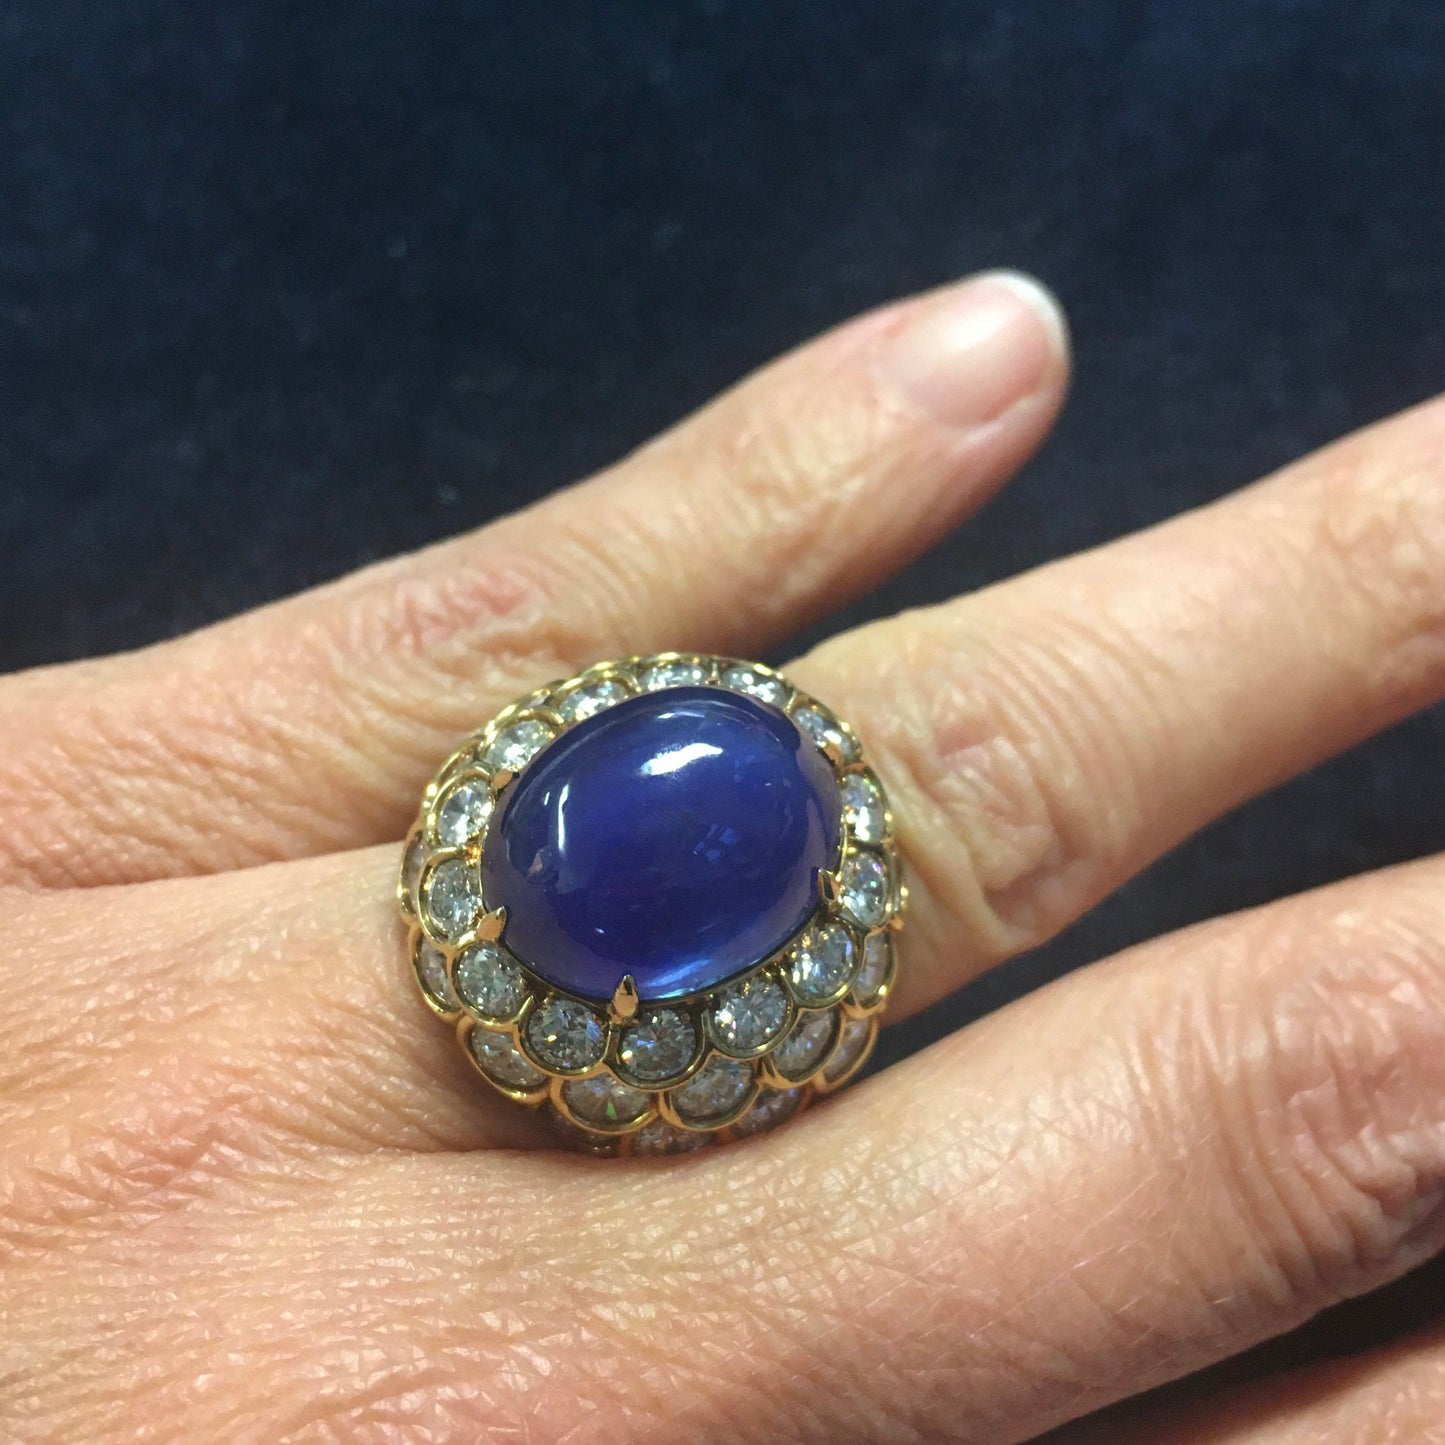 French 1960s 18KT Yellow Gold Unheated Blue Sapphire & Diamond Ring on finger